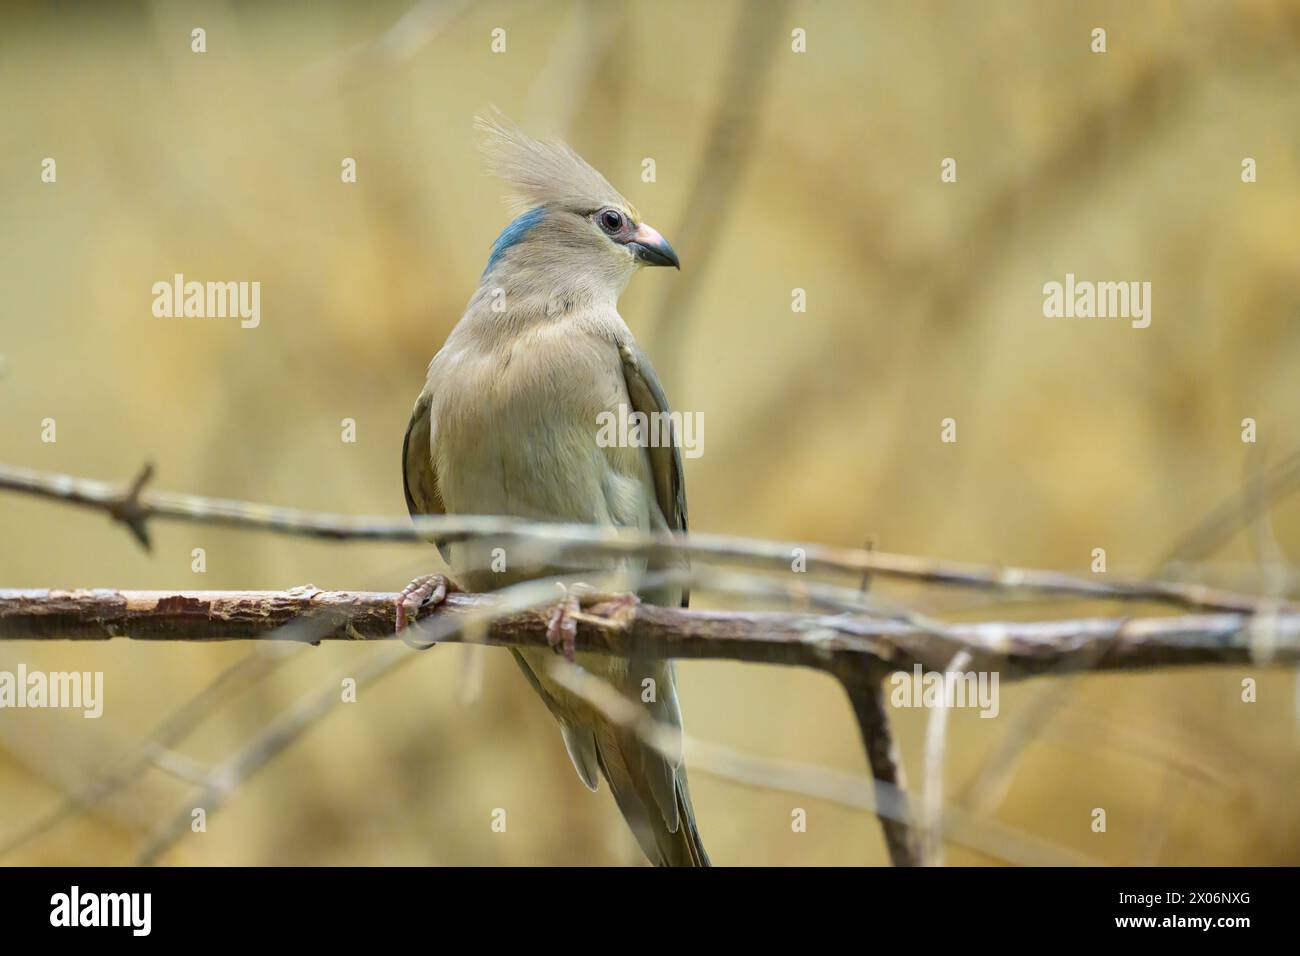 A blue naped Mousebird sitting on a branch in a zoo Stock Photo